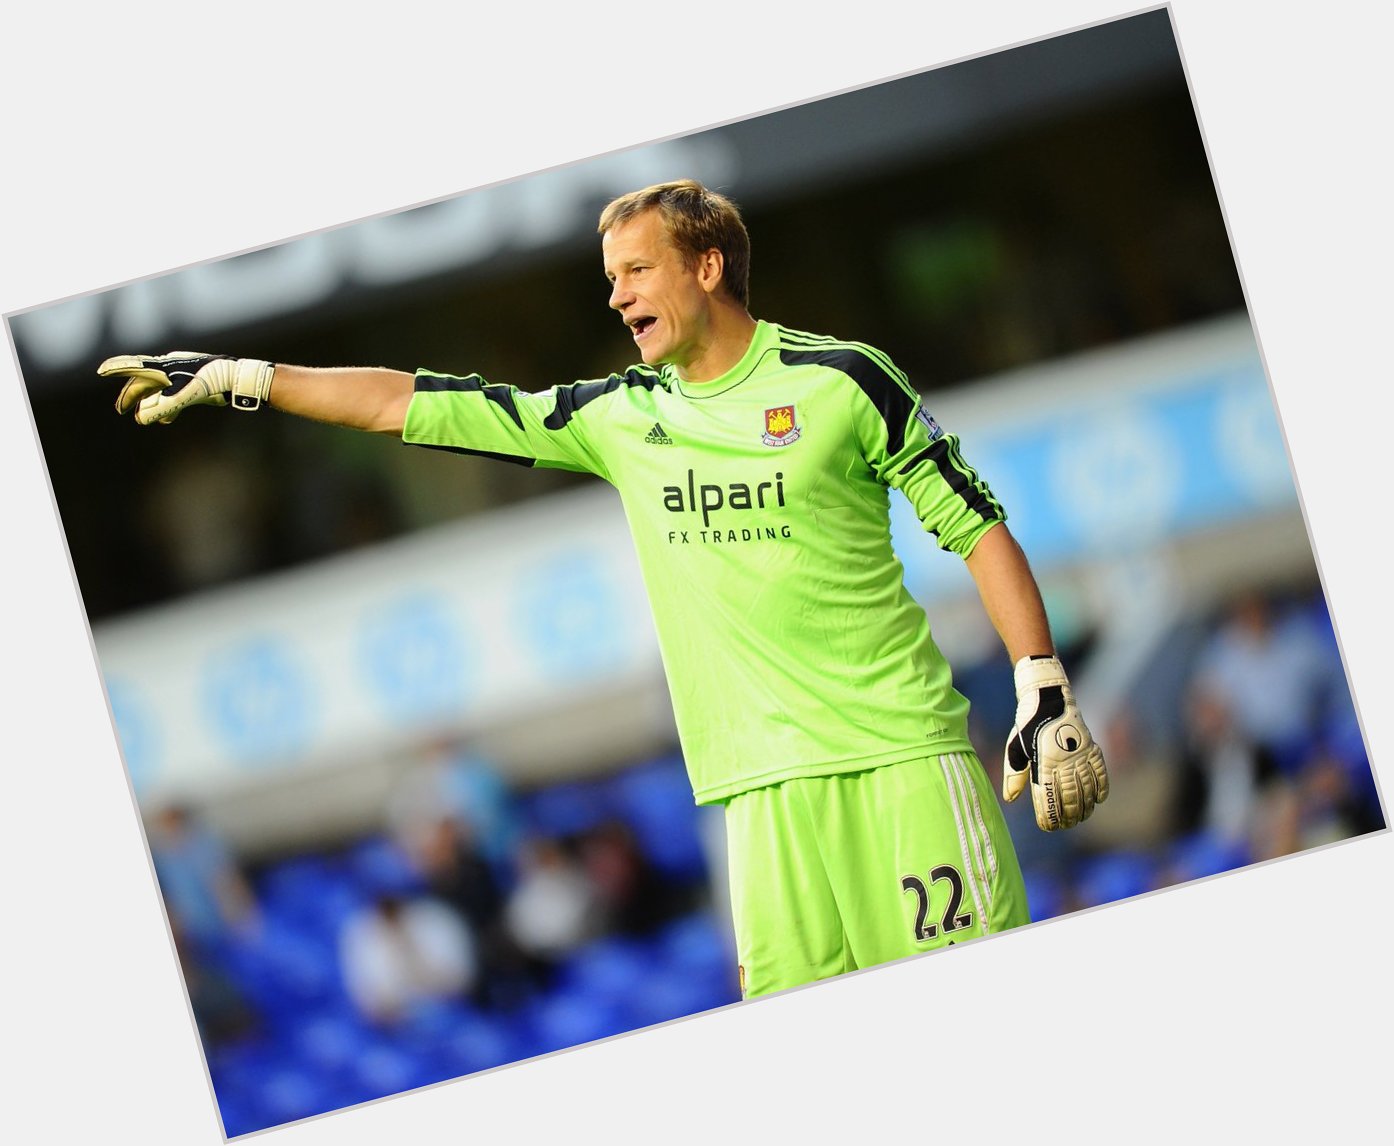 Happy birthday, Jussi Jaaskelainen! Have a great day! 